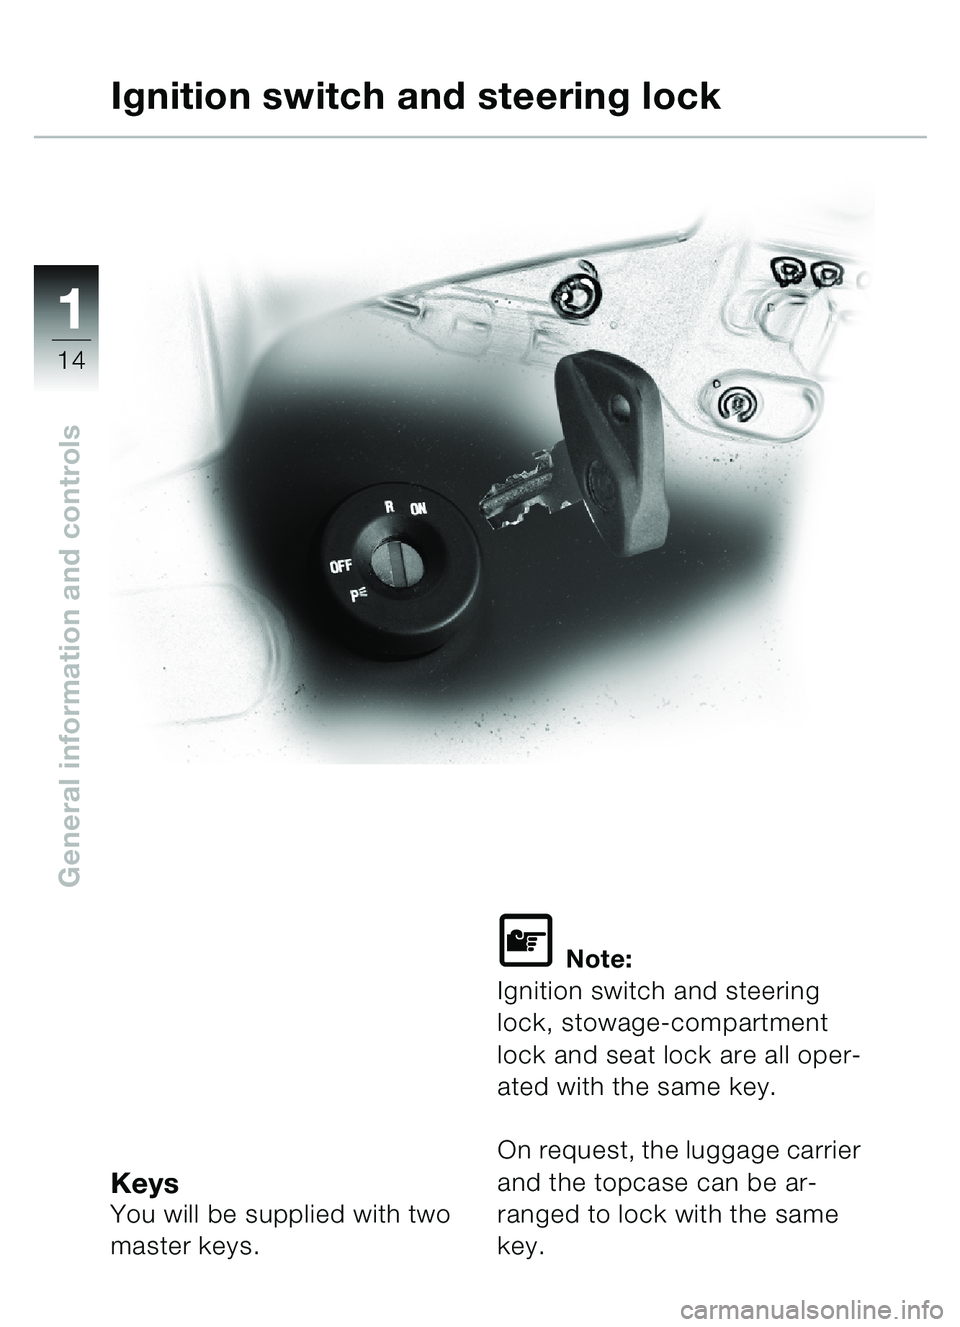 BMW MOTORRAD C1 2000  Riders Manual (in English) 11
14
General information and controls
KeysYou will be supplied with two 
master keys.
\f Note:
Ignition switch and steering 
lock, stowage-compartment 
lock and seat lock are all oper-
ated with the 